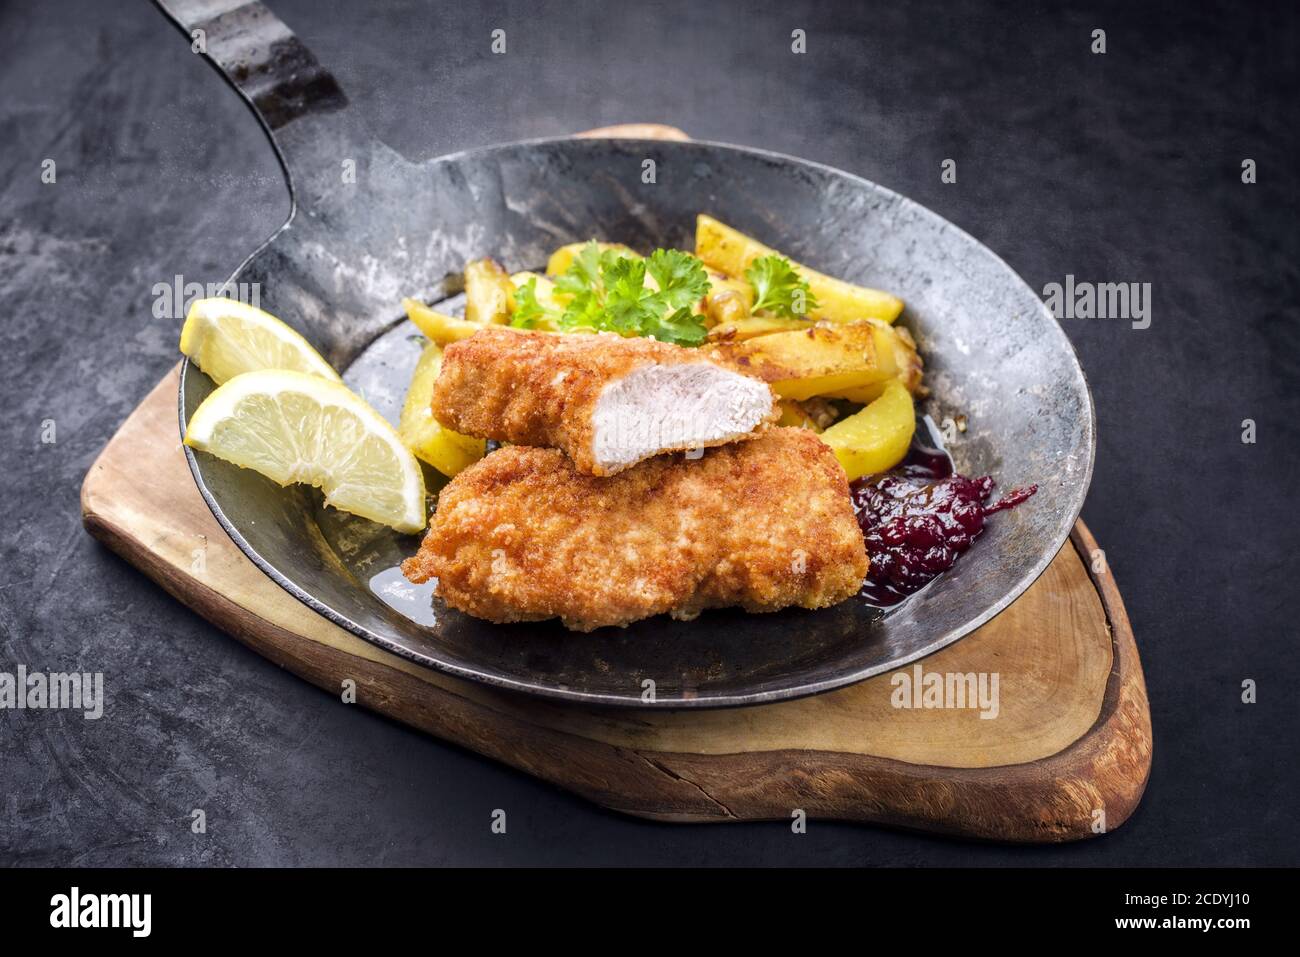 Traditional deep fried veal steak with roast potatoes and cranberry sauce offered as closeup in a rustic old wrought iron skille Stock Photo